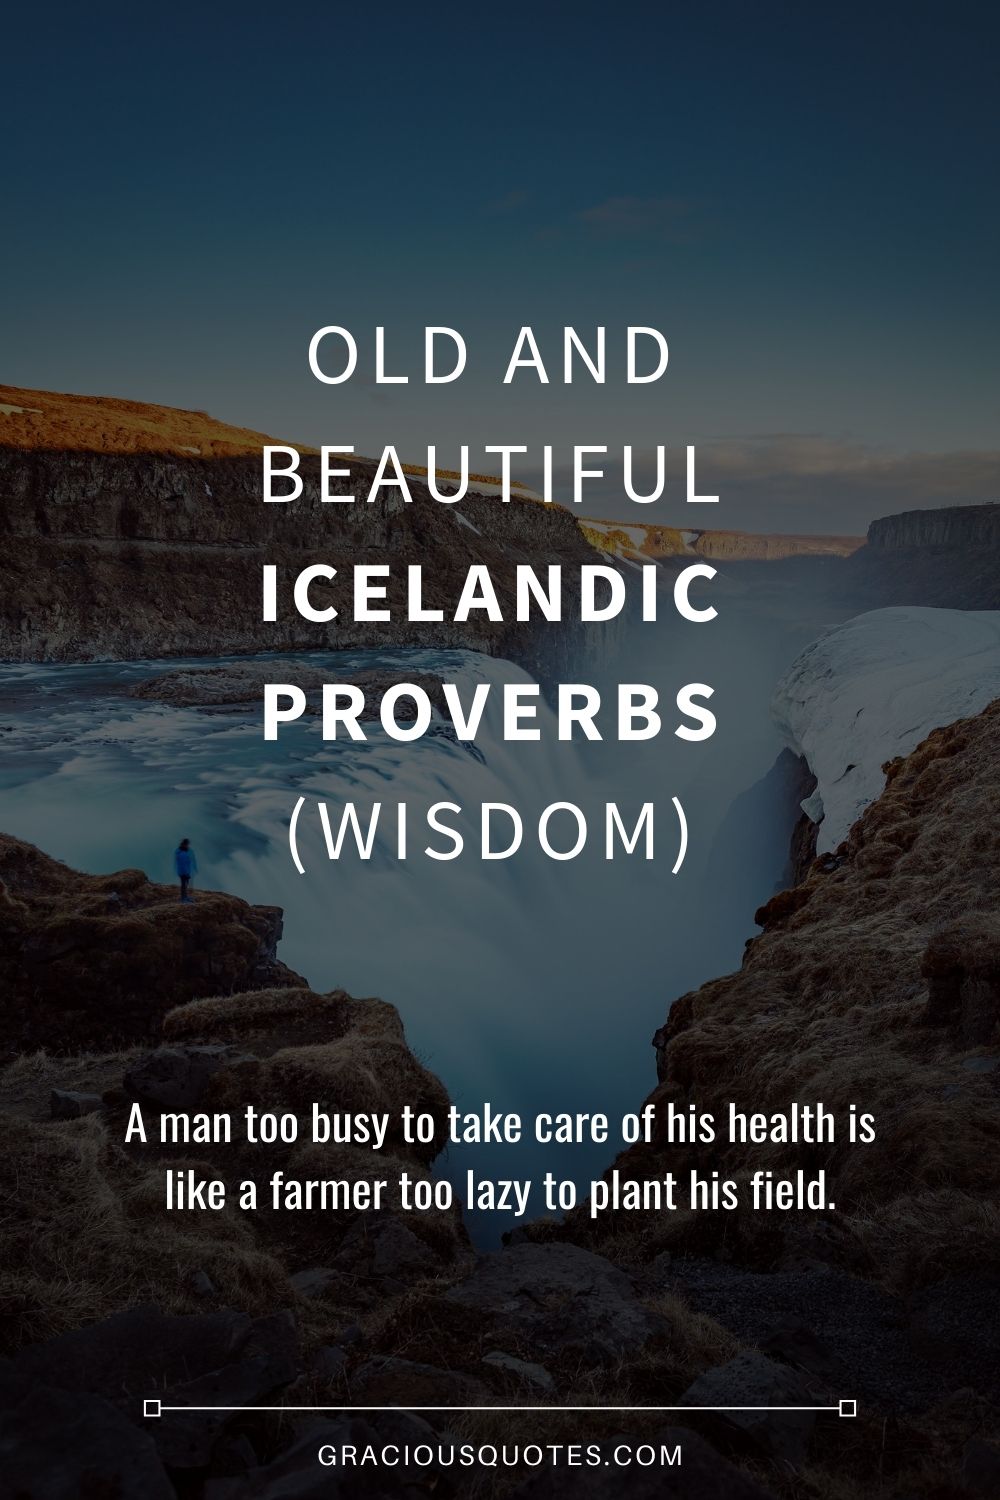 Old and Beautiful Icelandic Proverbs (WISDOM) - Gracious Quotes